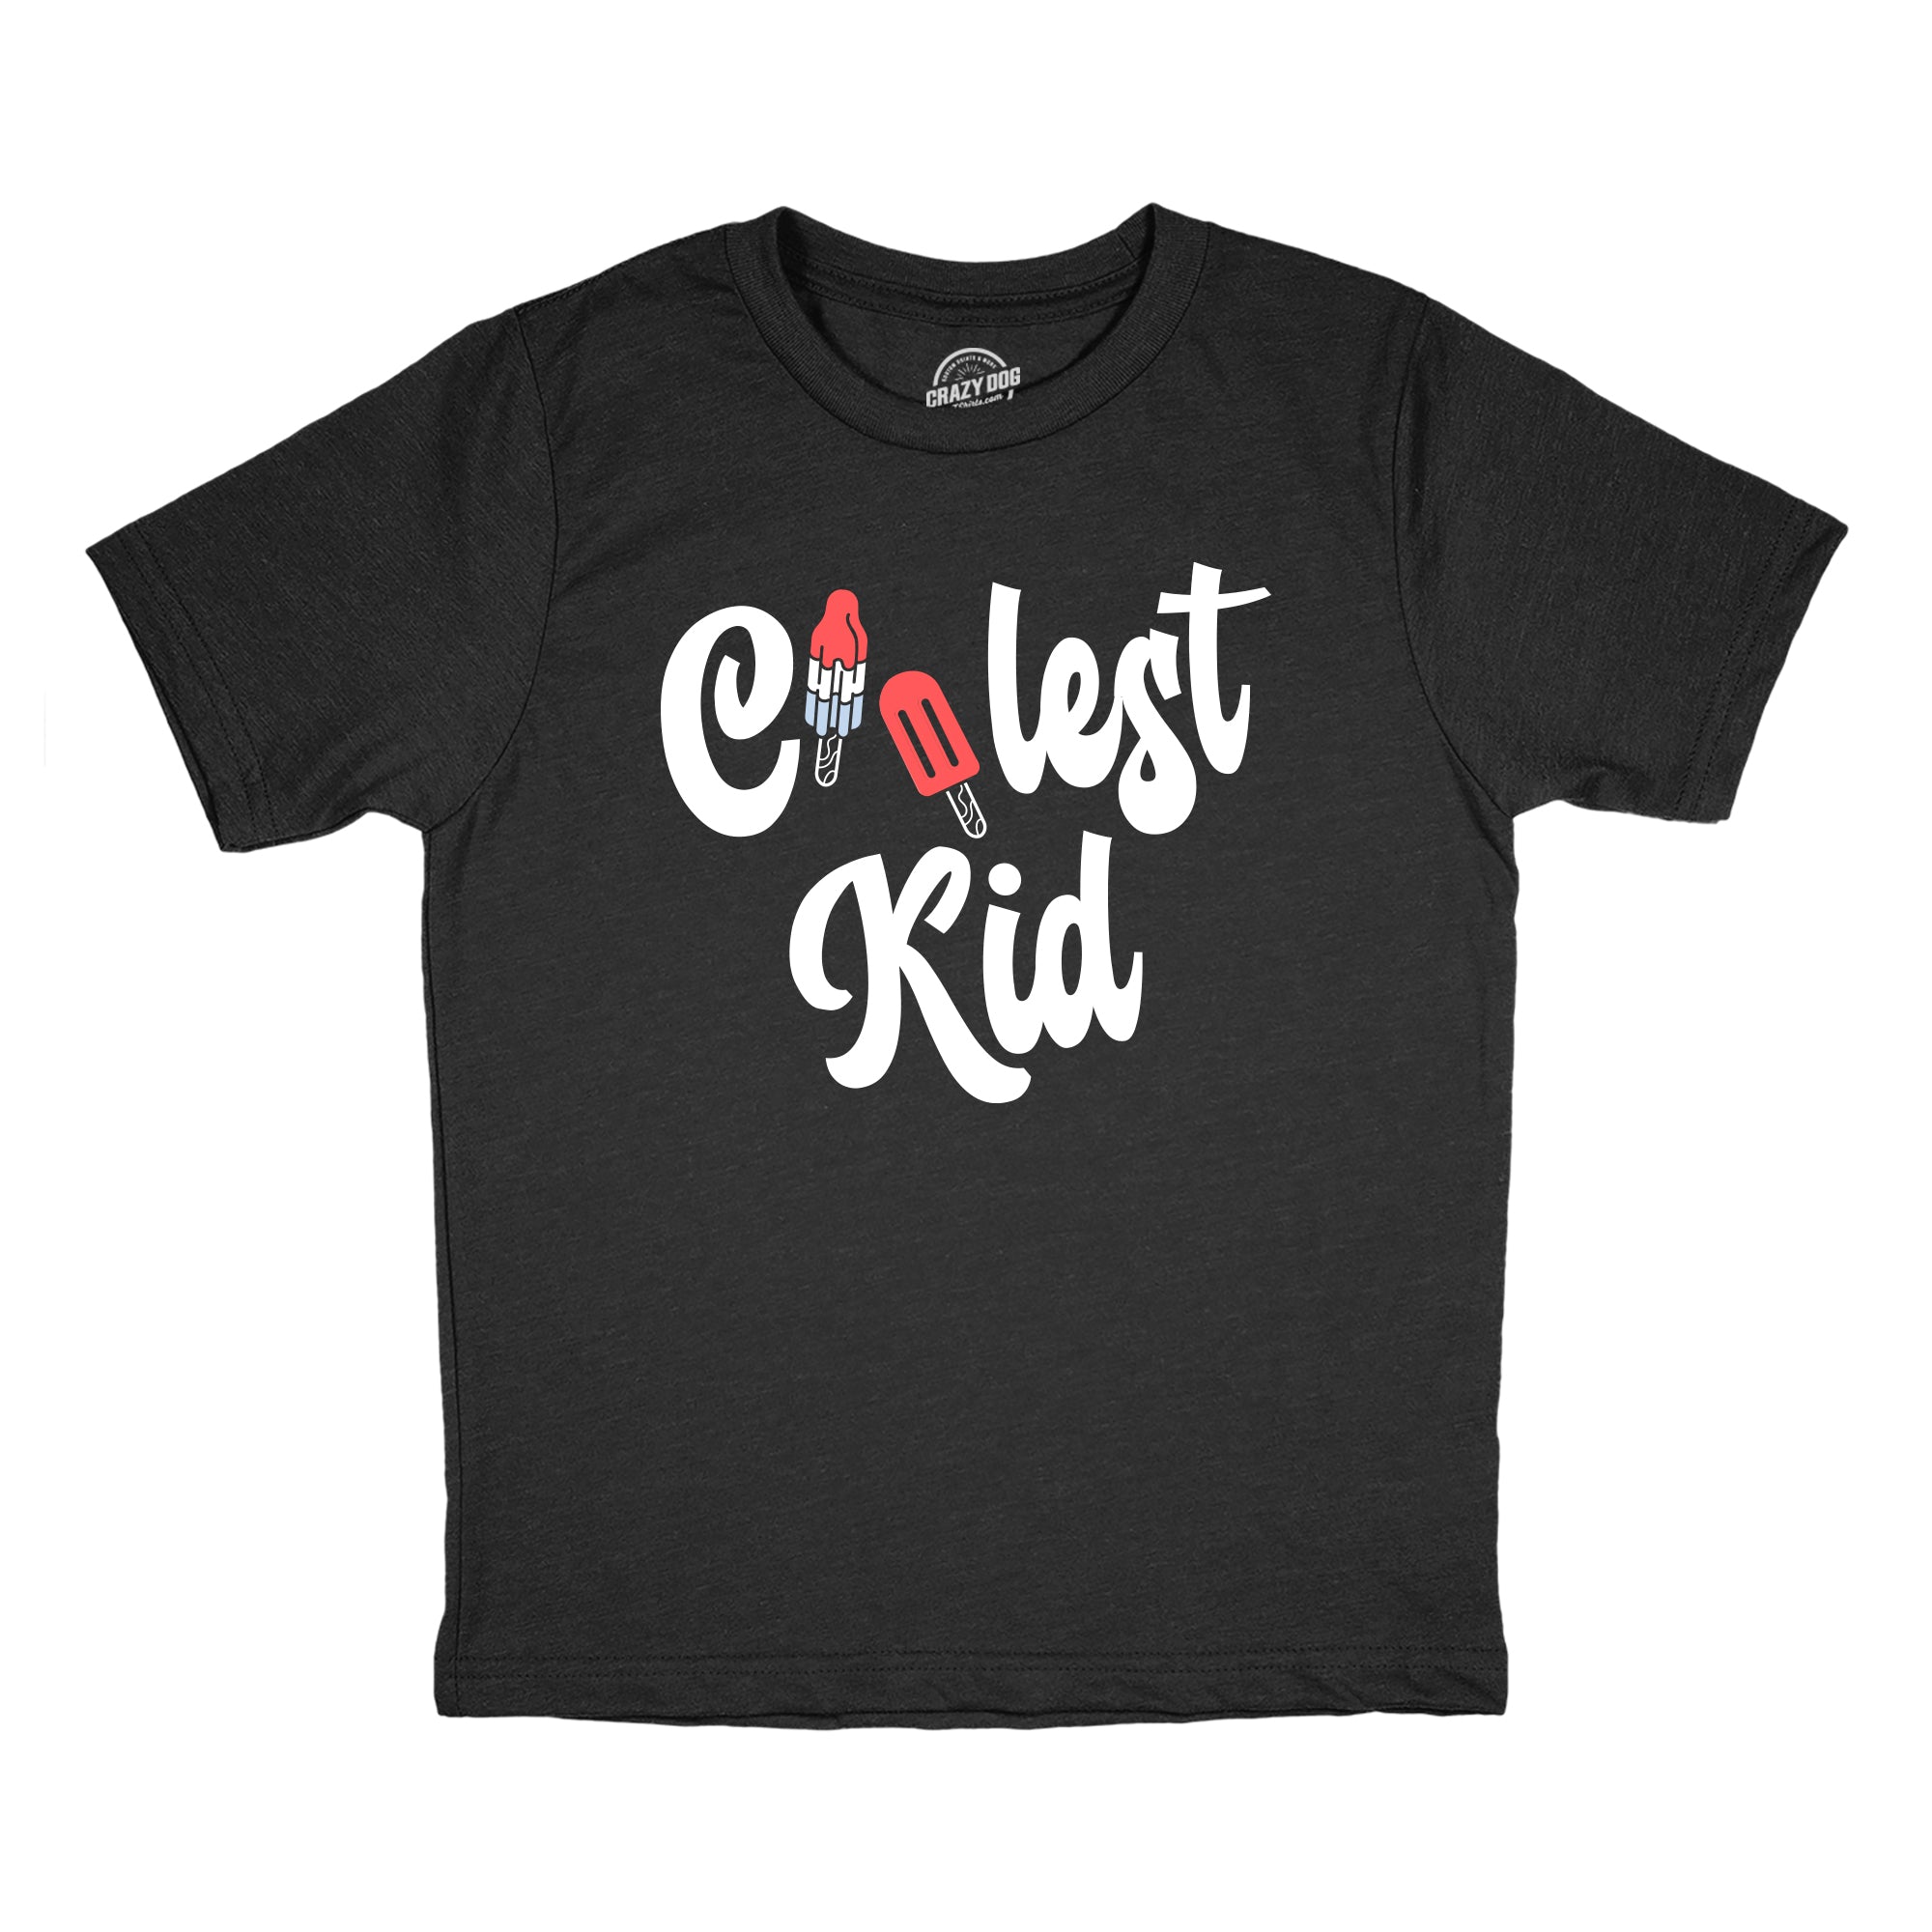 Funny Heather Black - COOLEST Coolest Kid Youth T Shirt Nerdy Sarcastic Tee